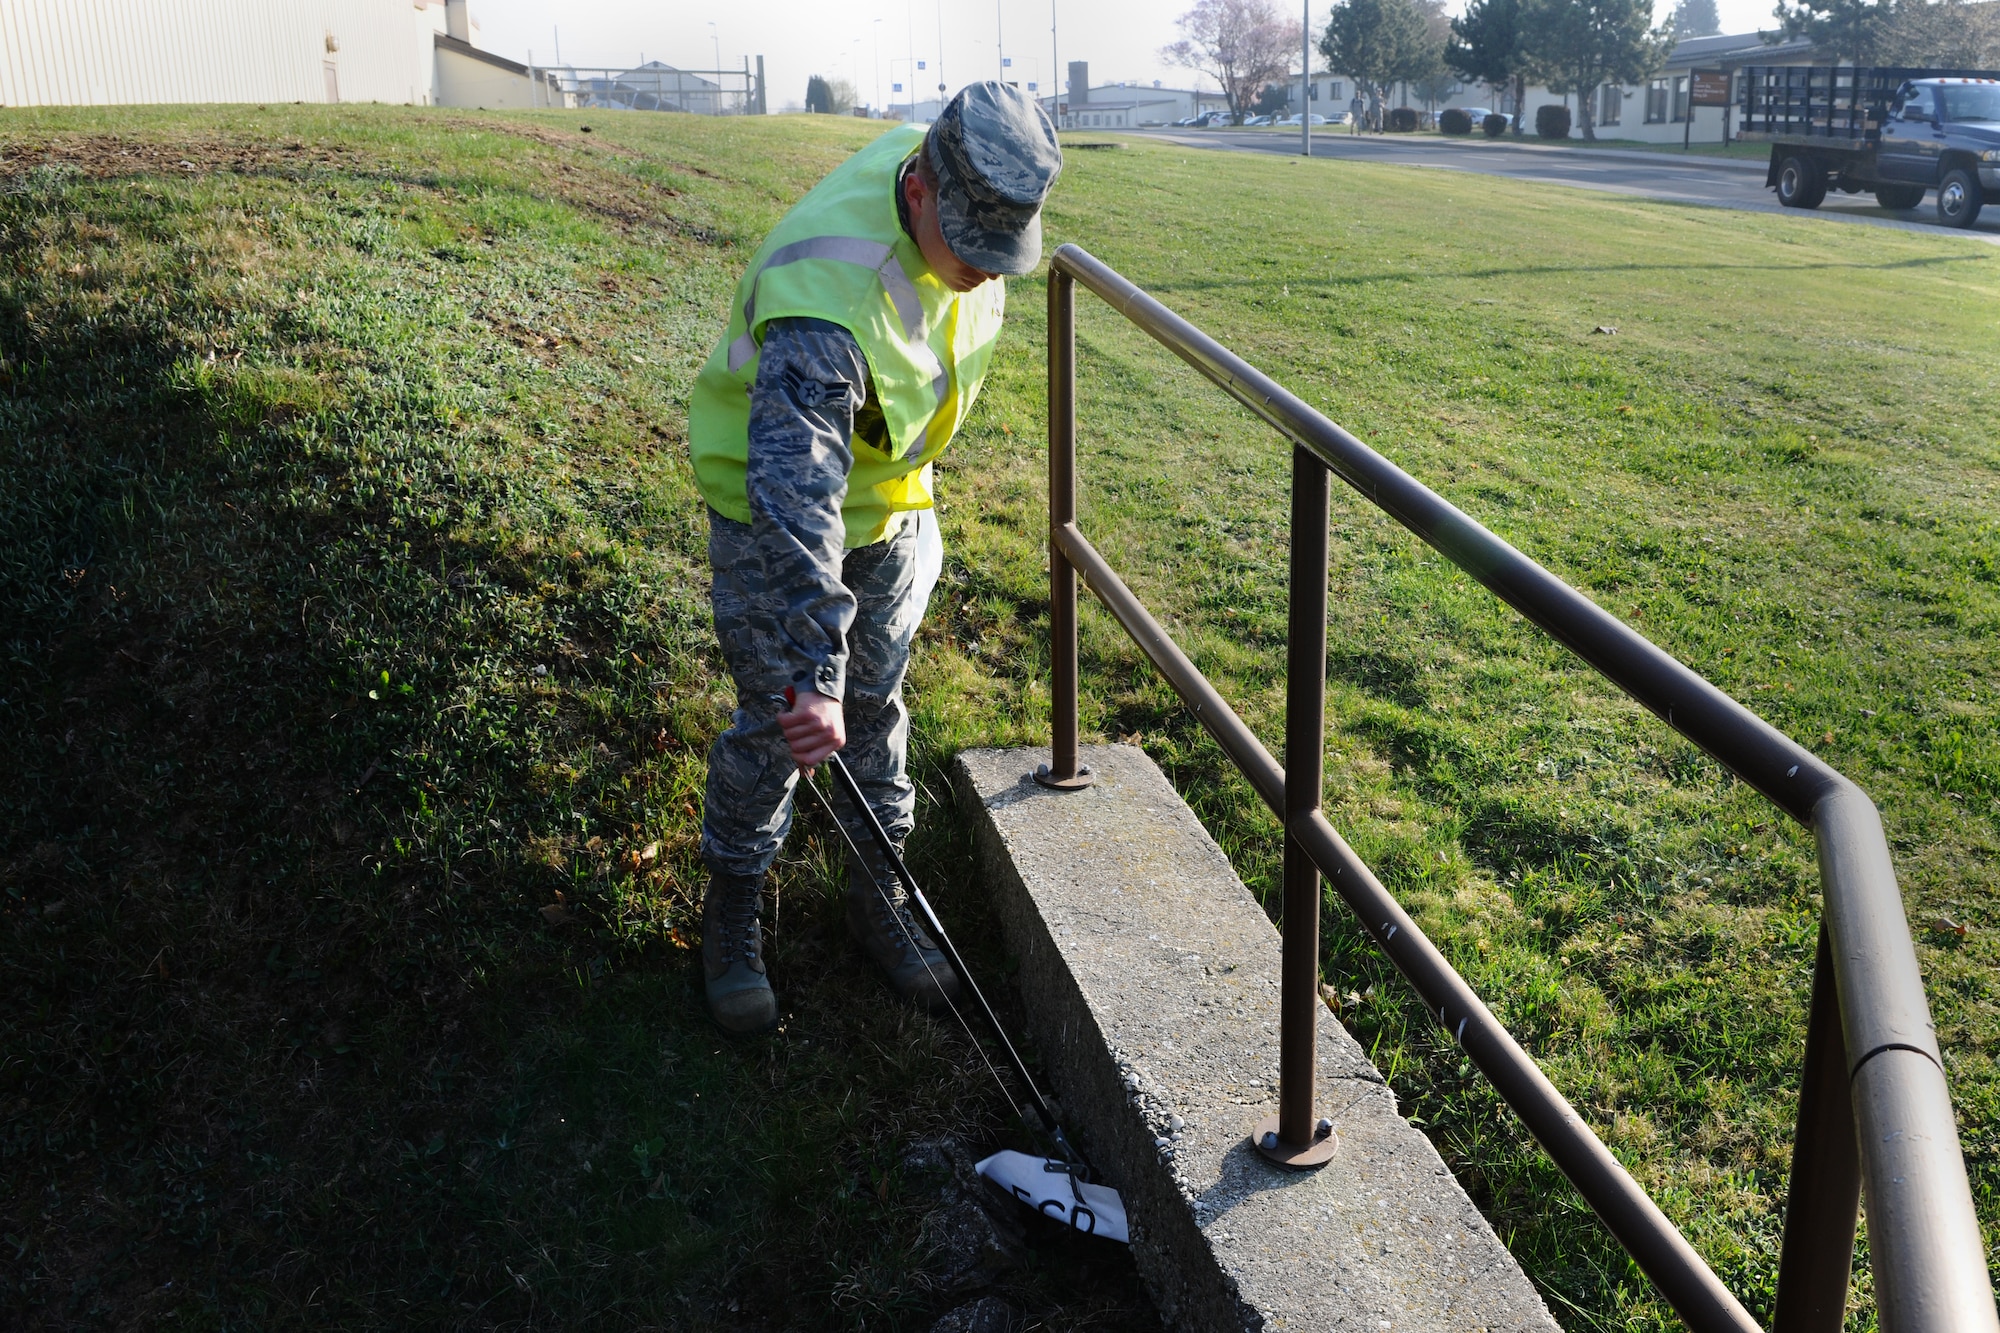 SPANGDAHLEM AIR BASE, Germany – Airman 1st Class Nicholas Chapman, 52nd Equipment Maintenance Squadron aircraft armament apprentice, picks up a piece of paper during his morning Eifel Pride trash route near Arnold Boulevard here April 3. Eifel Pride is a mandatory two-week program for first-term Airmen stationed here immediately following initial technical training school. The program helps Airmen become oriented to the base, allows them to finish their in-processing and aids in the ongoing 52nd Fighter Wing goal of becoming United States Air Forces in Europe’s most environmentally-friendly wing. (U.S. Air Force photo by Airman 1st Class Dillon Davis/Released)